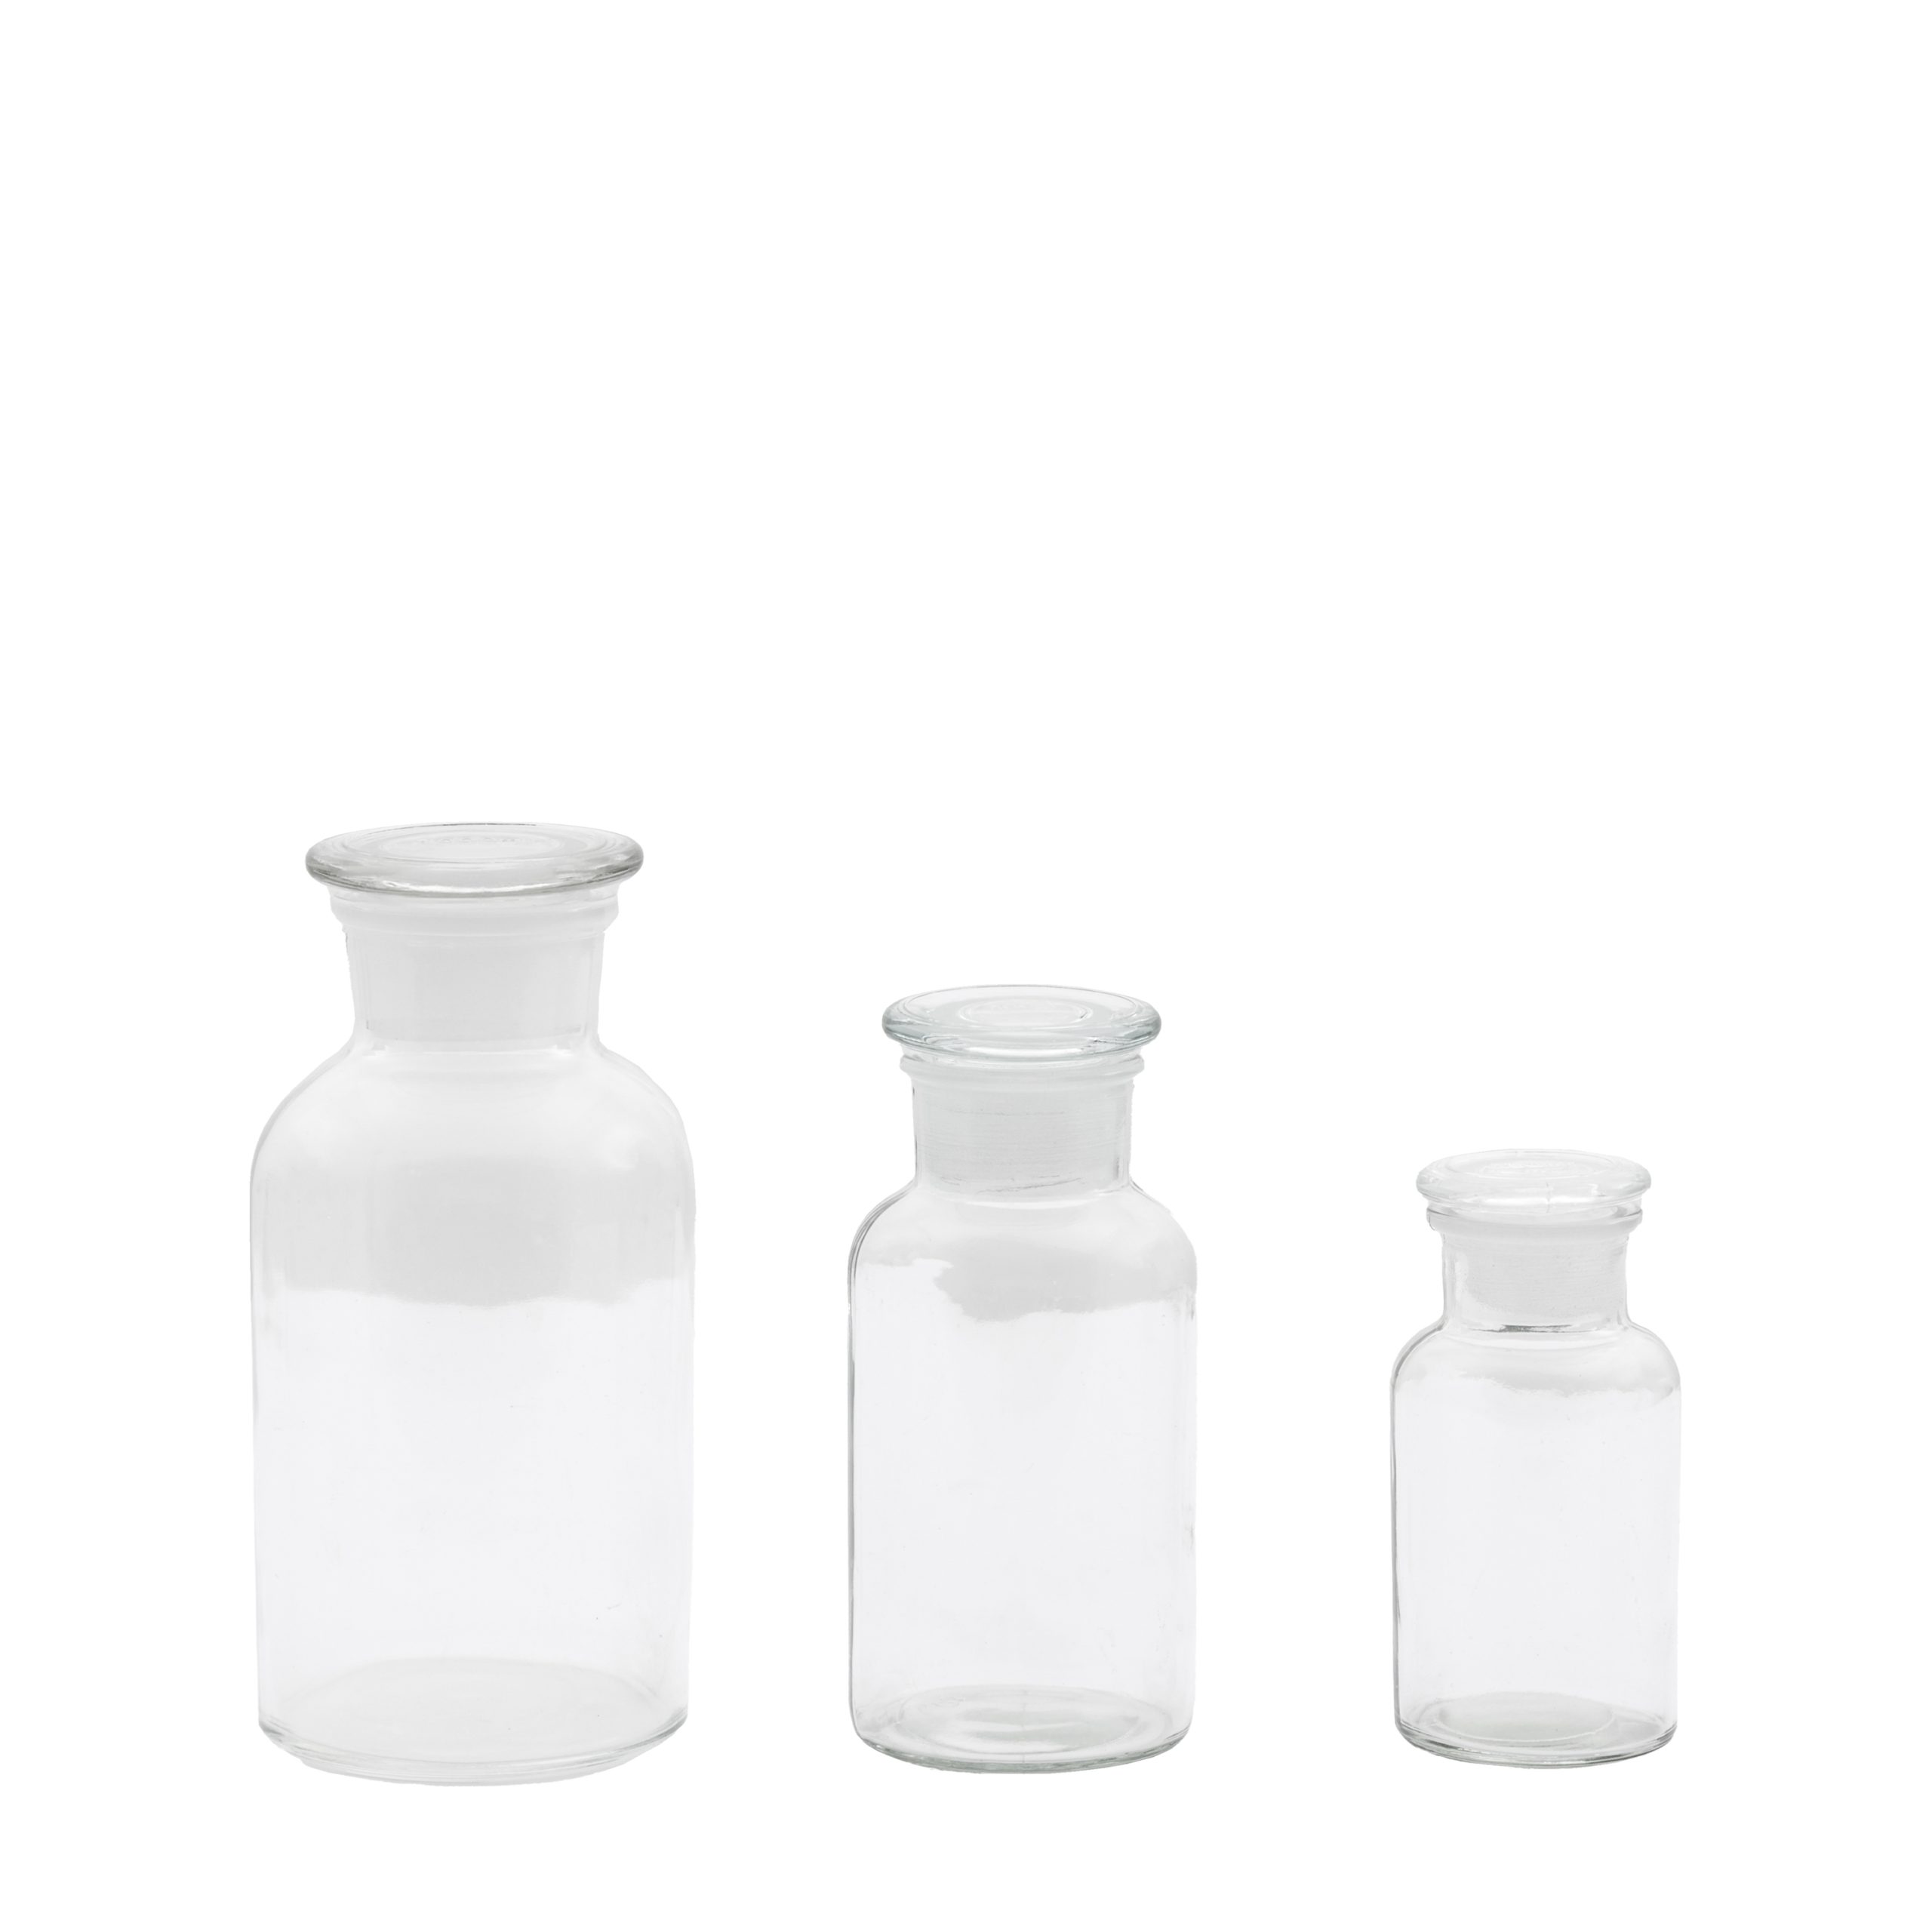 Gallery Direct Apotheca Jar Clear (Set of 3)